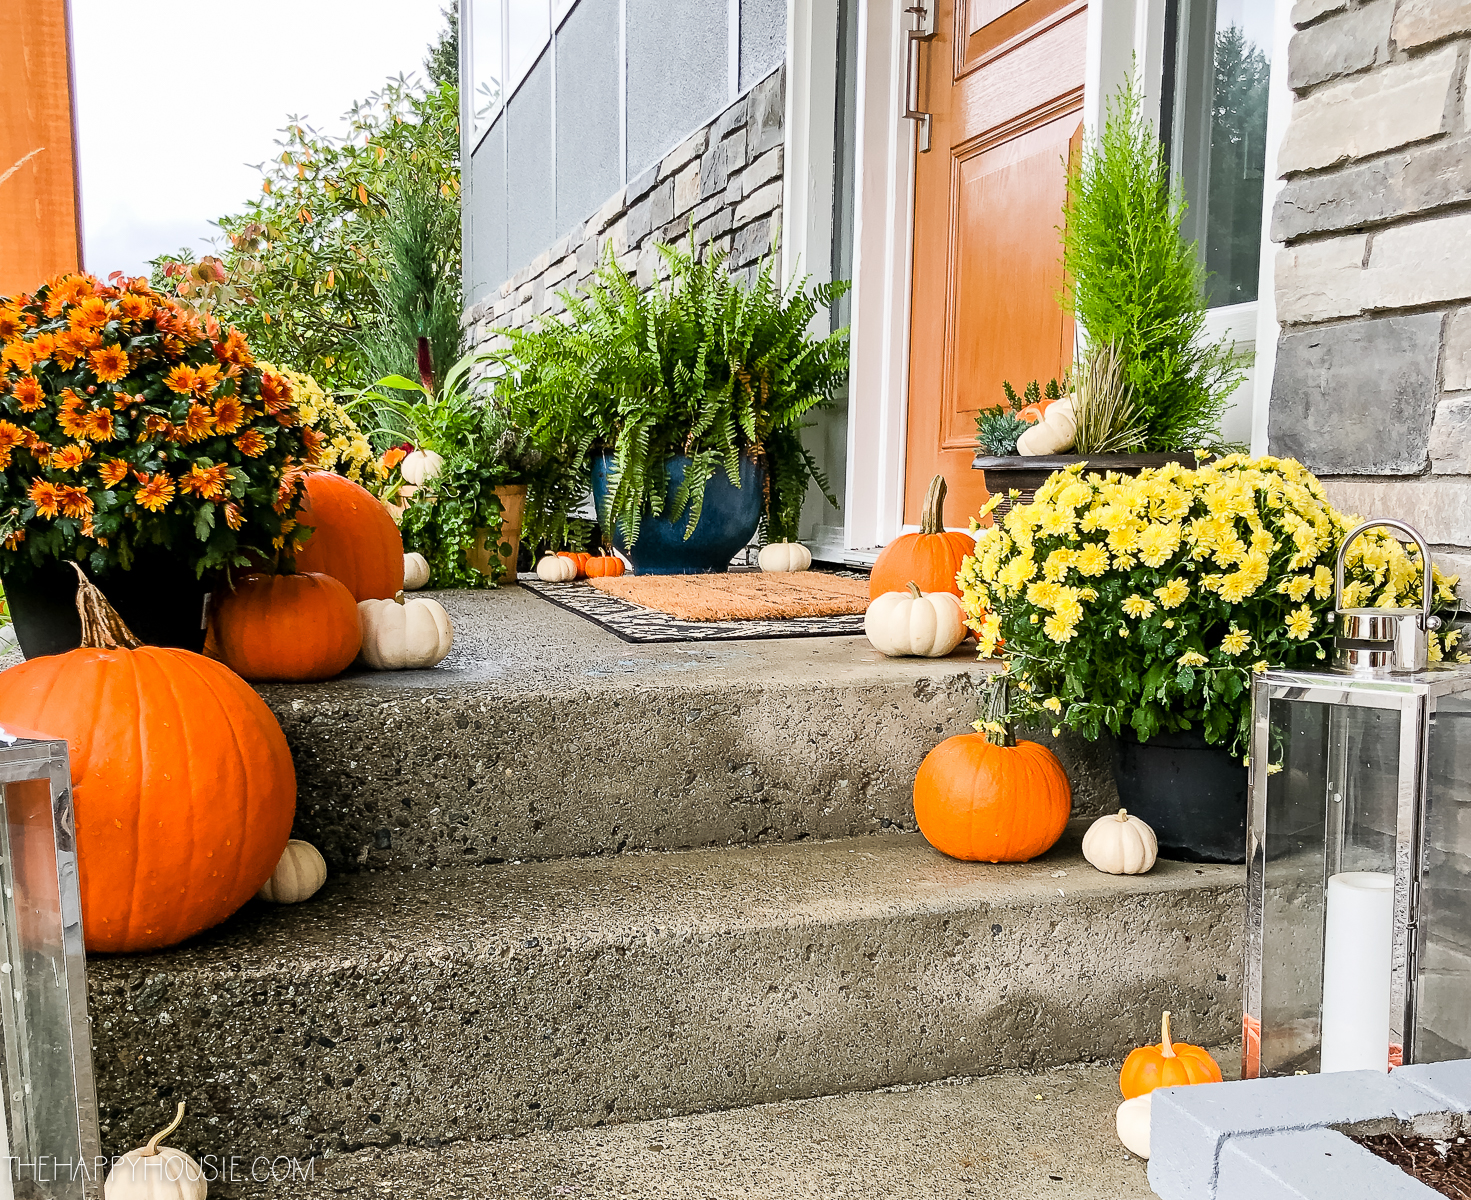 A look at the autumn decorated steps to the door.